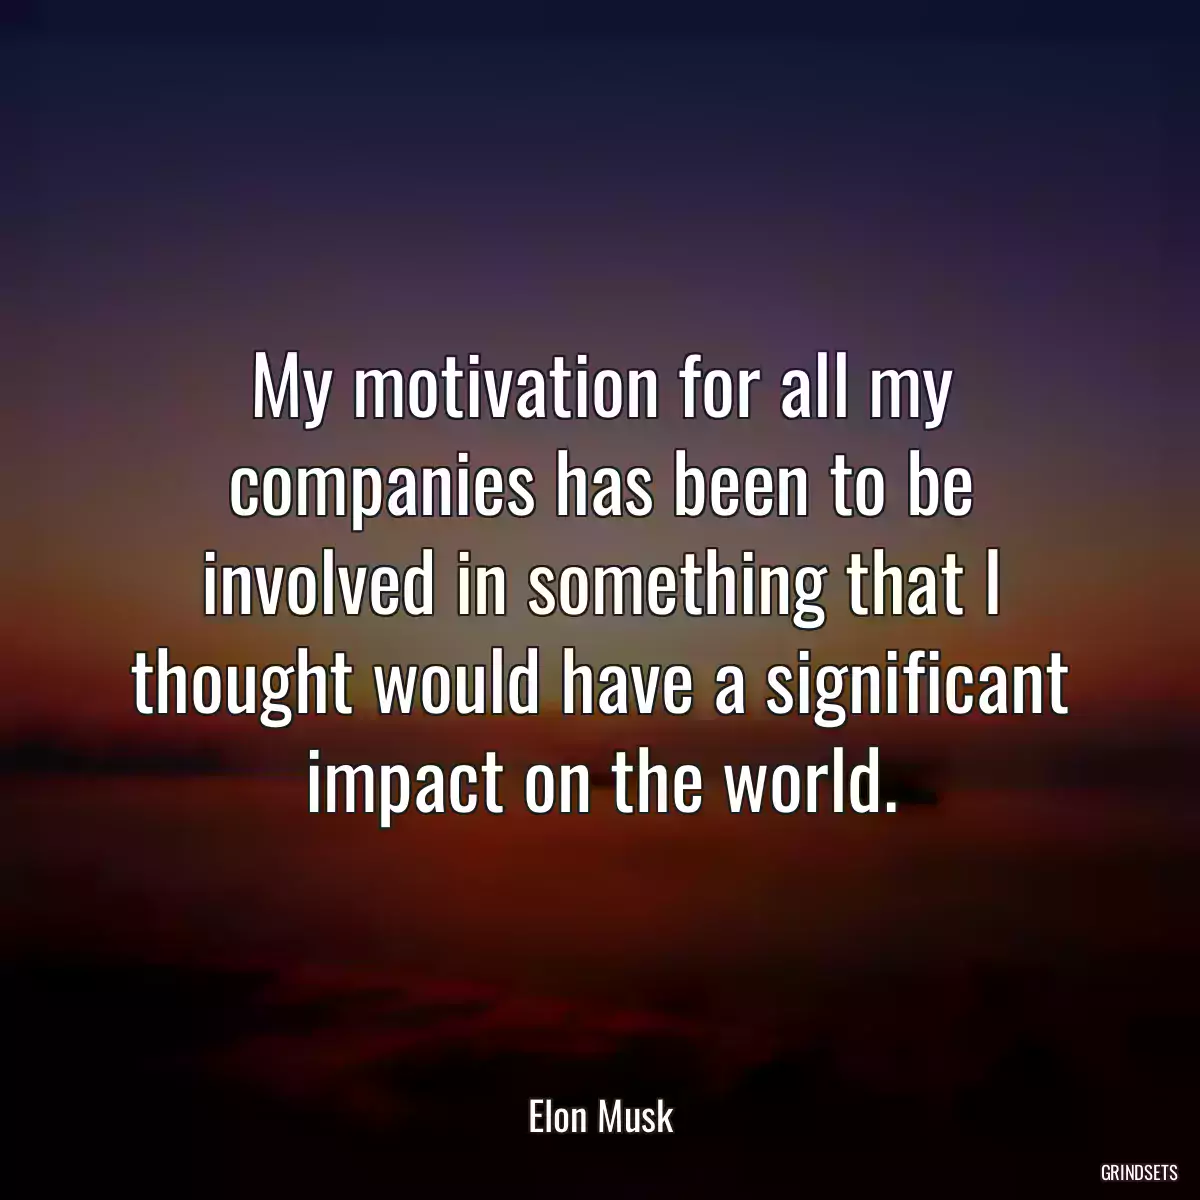 My motivation for all my companies has been to be involved in something that I thought would have a significant impact on the world.